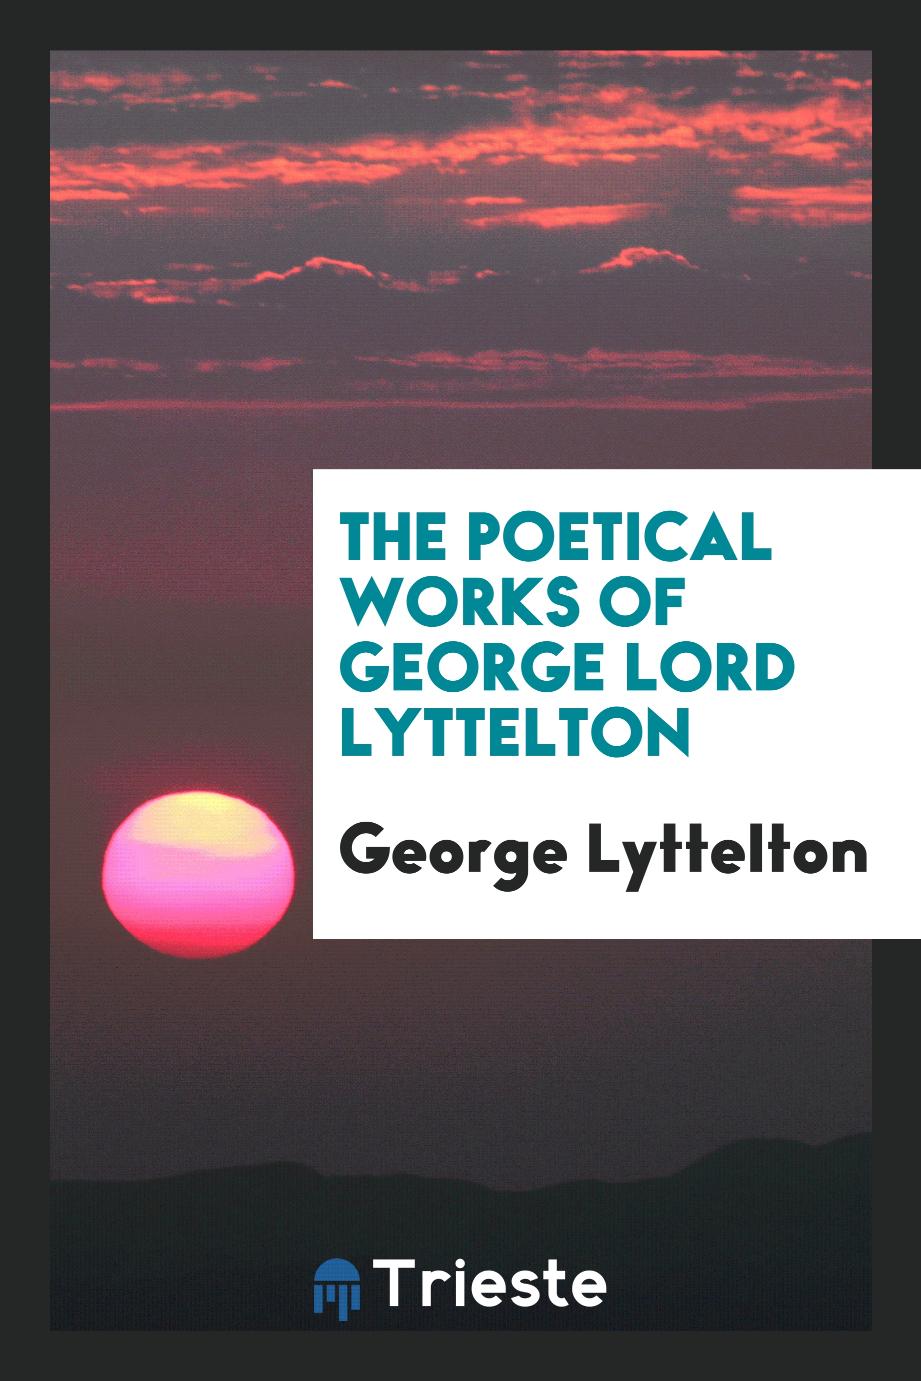 The Poetical Works of George Lord Lyttelton